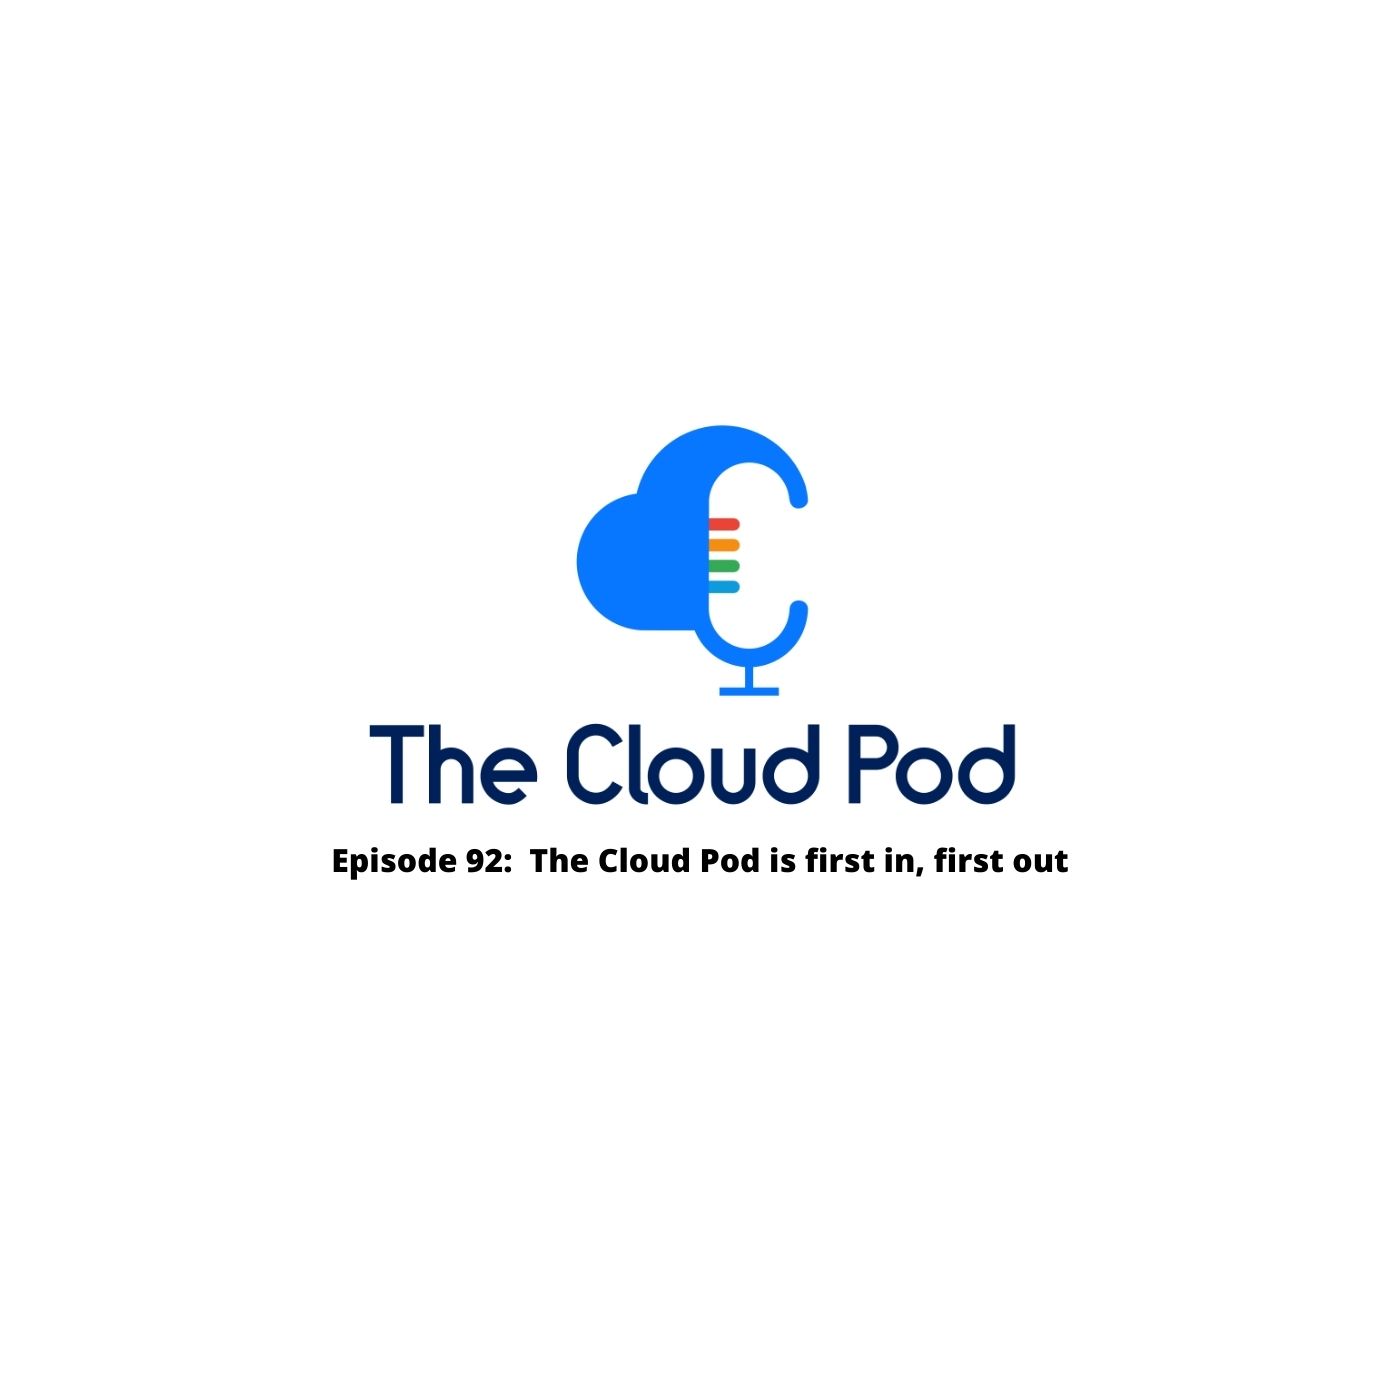 Episode 92: The Cloud Pod is first in, first out